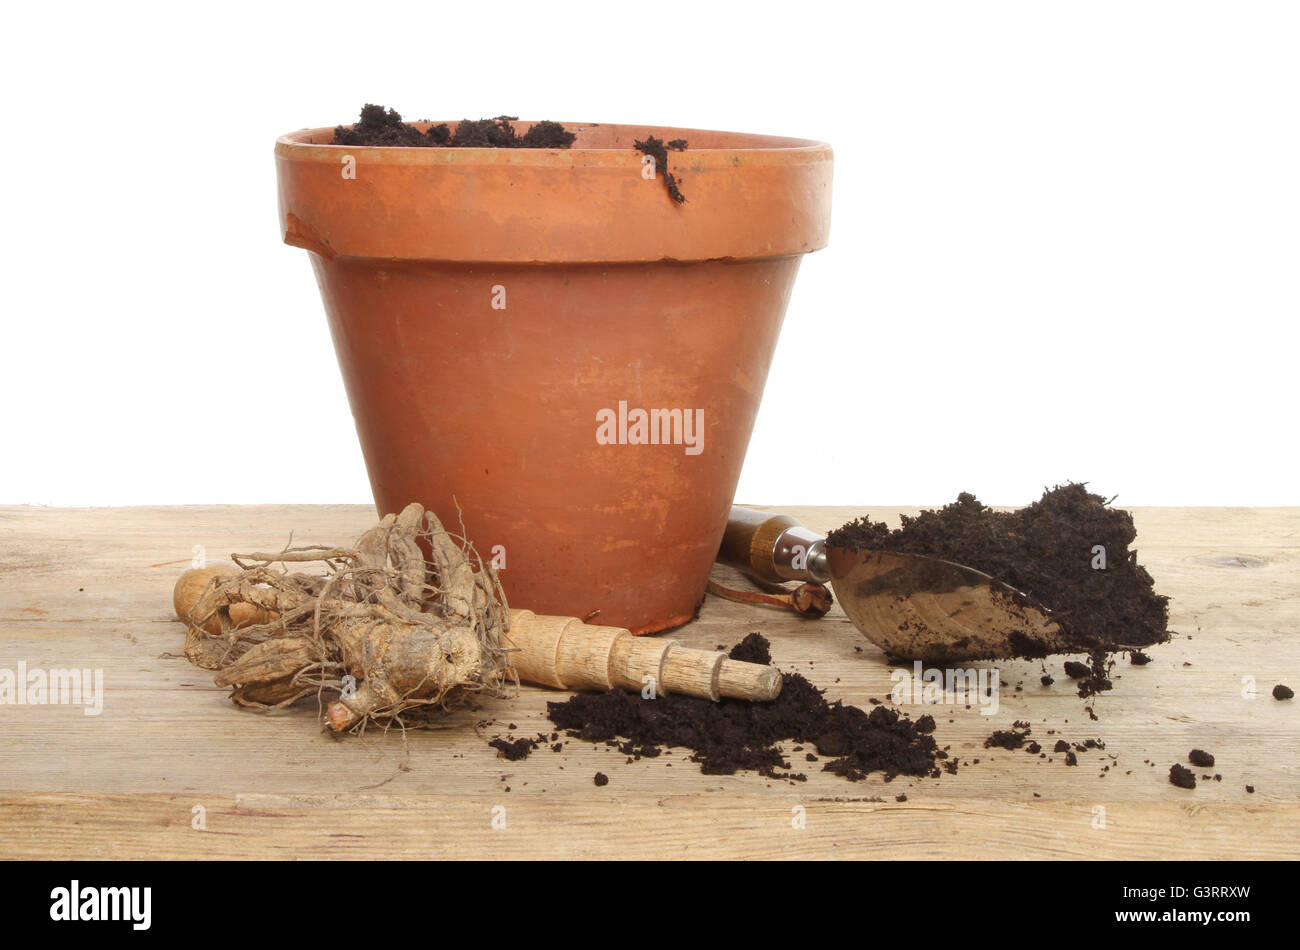 Dahlia tuber with a terracotta plant pot, tools and compost on a potting bench against a white background Stock Photo